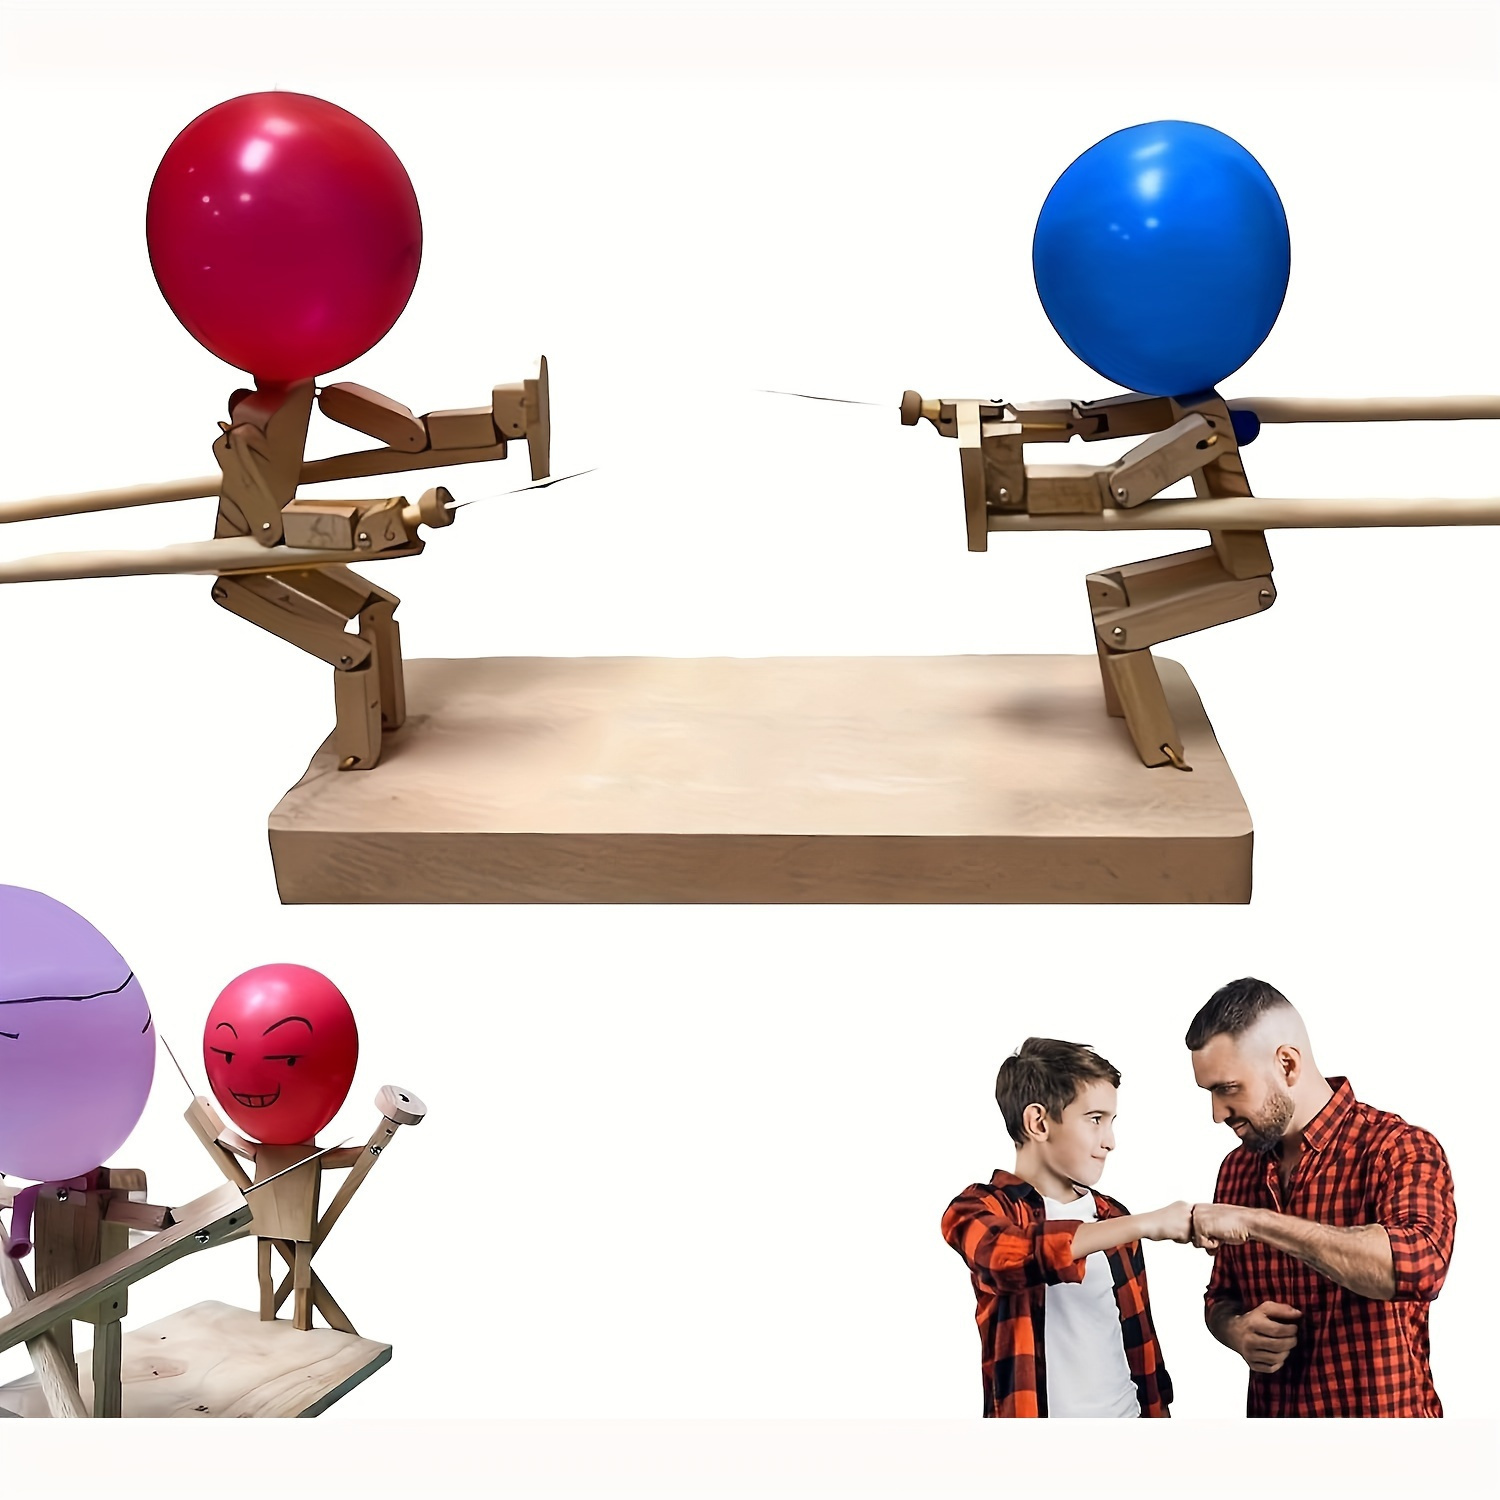 

Handcrafted Bamboo Balloon Fencing Game - 2-player Wooden Dueling Puppets, Whack A Balloon Party Game For Teens & Adults (11.81" X 3mm)